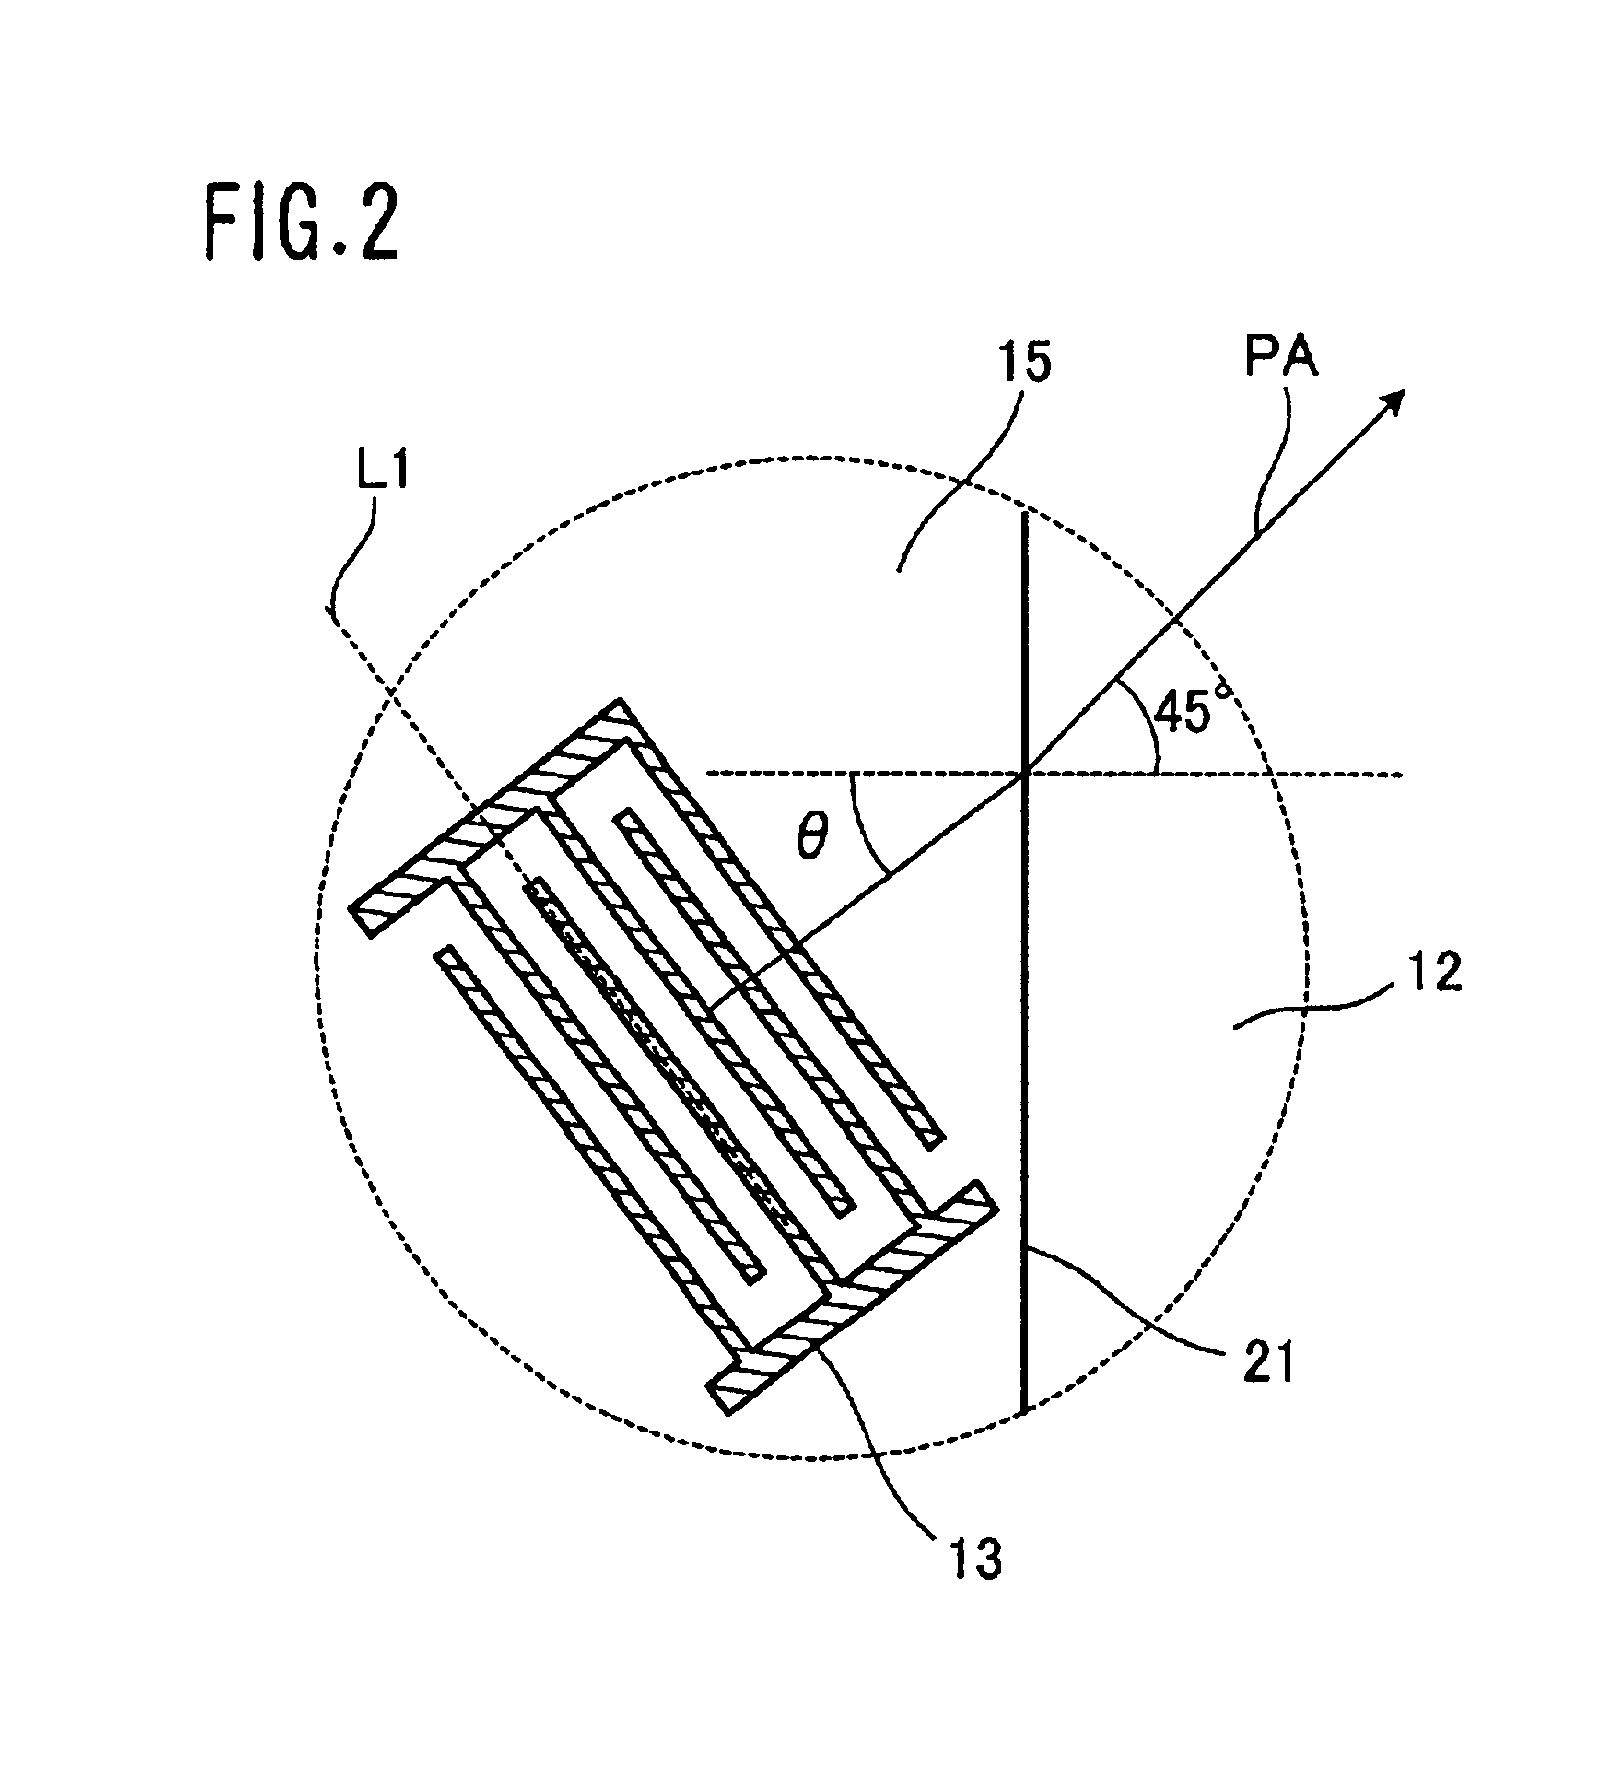 Touch panel device